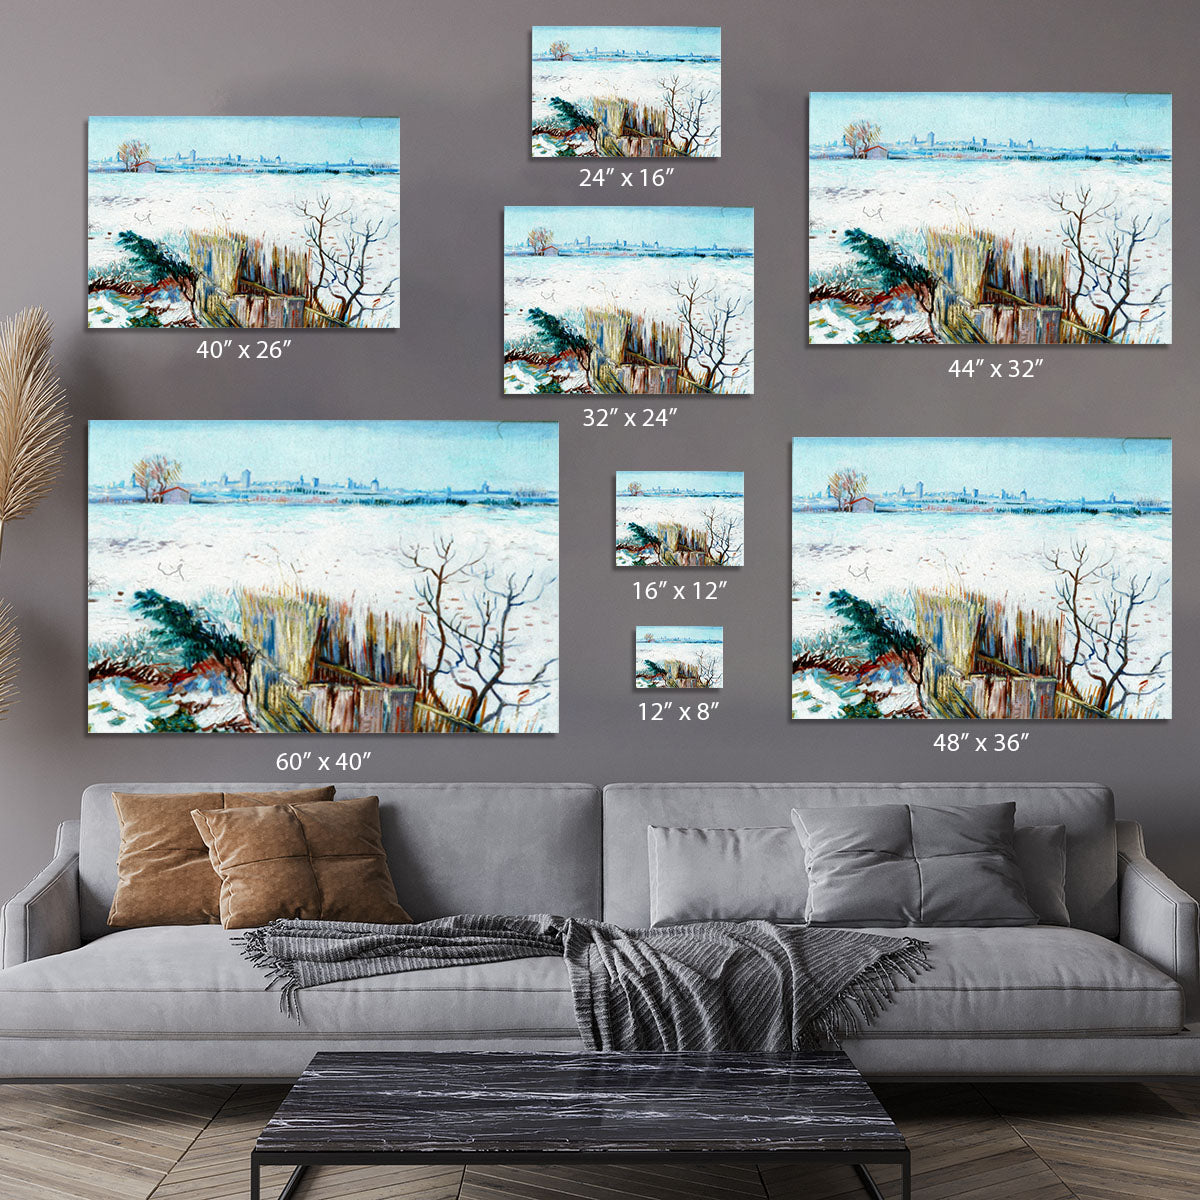 Snowy Landscape with Arles in the Background by Van Gogh Canvas Print or Poster - Canvas Art Rocks - 7